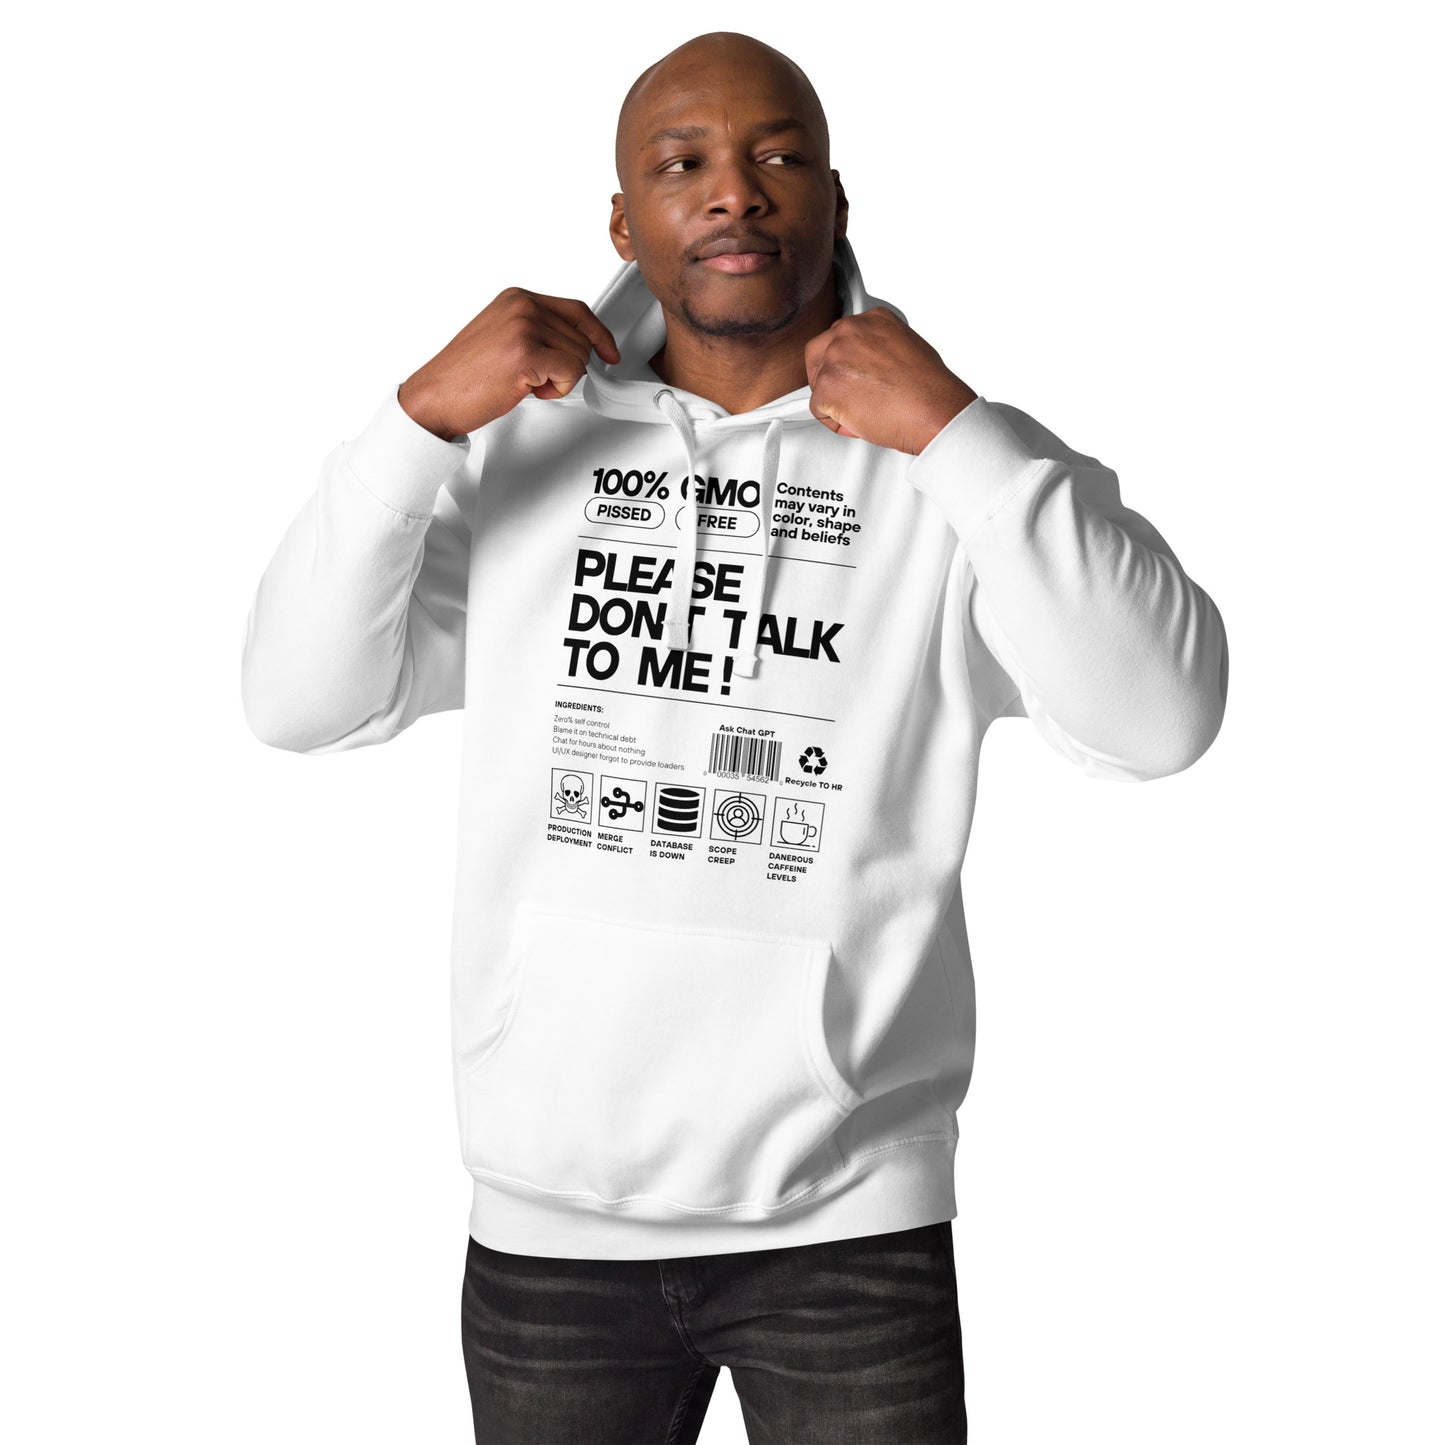 Don't Talk to Me Hoodie - Light